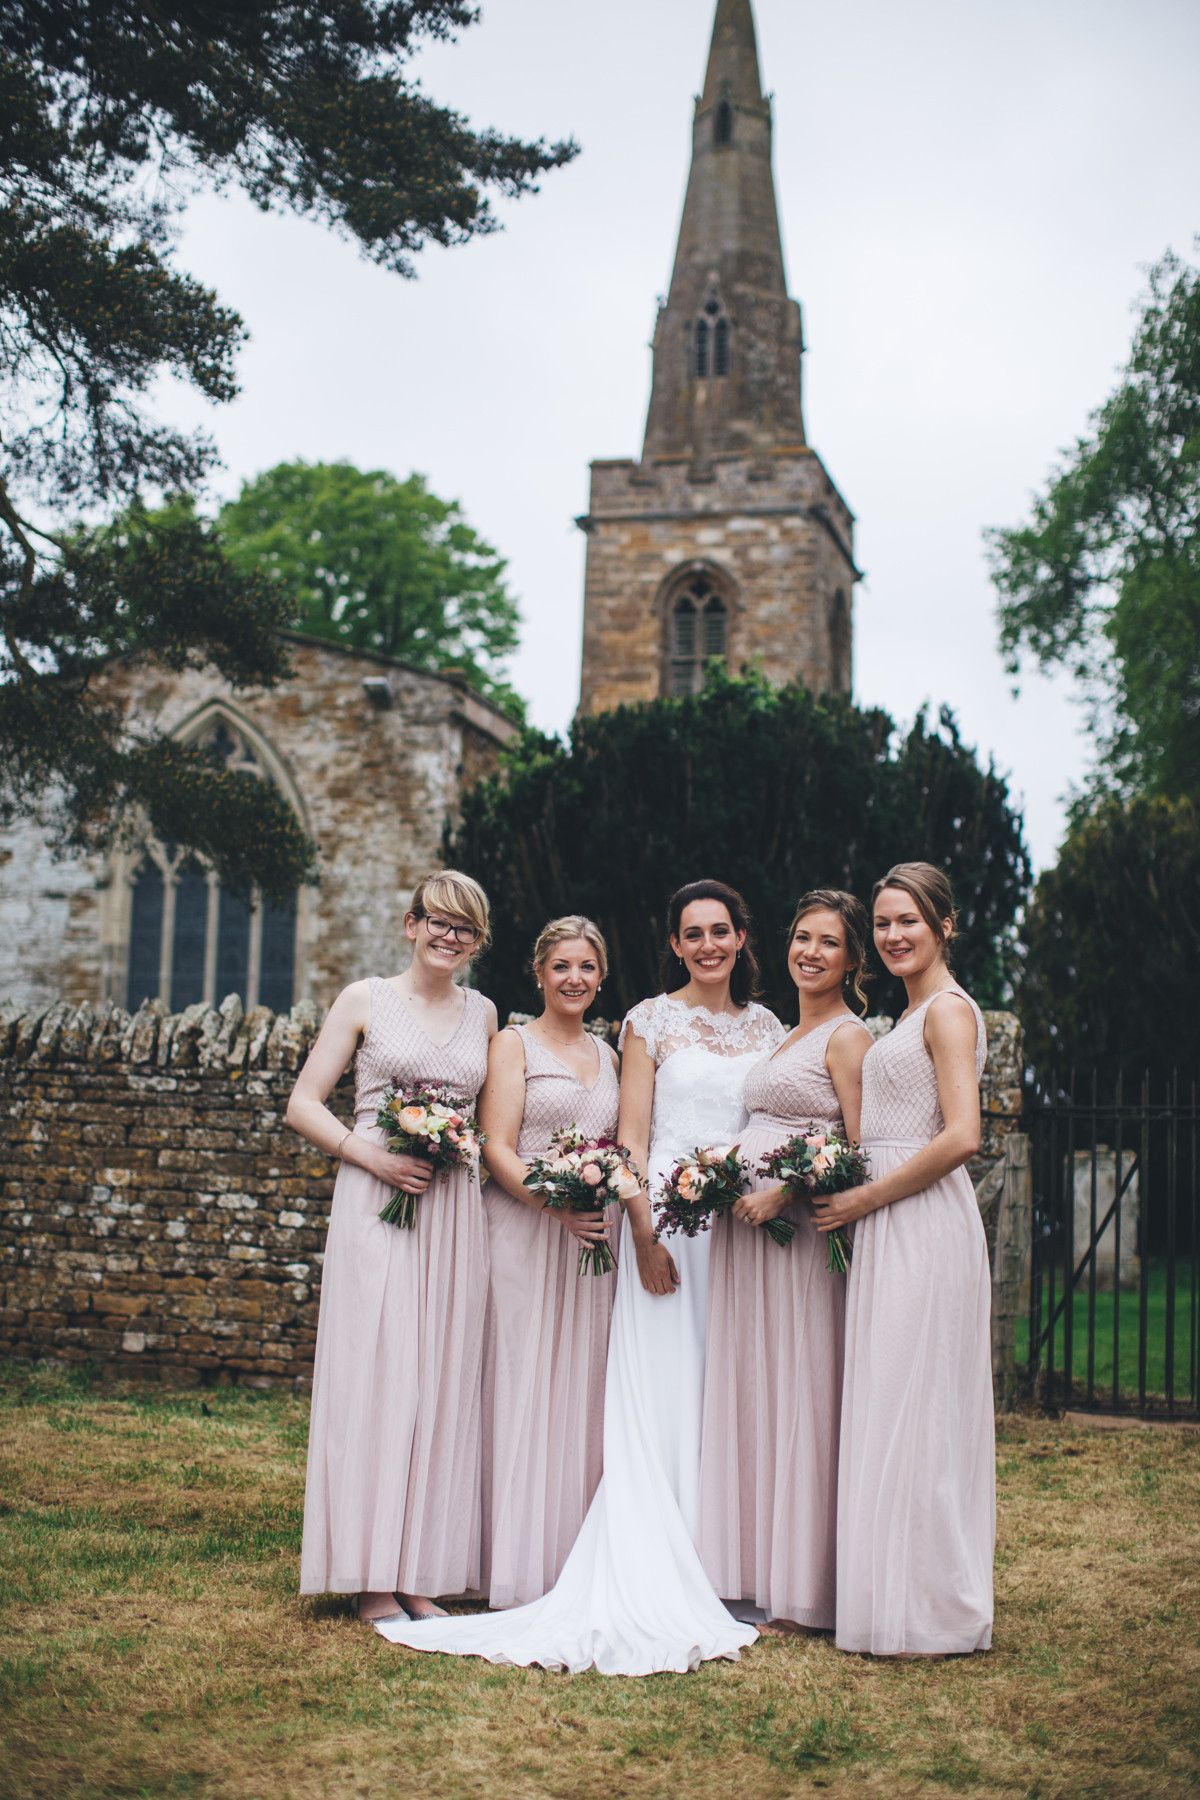 Bride and four bridesmaids stood in front of a stone wall in front of a church spire